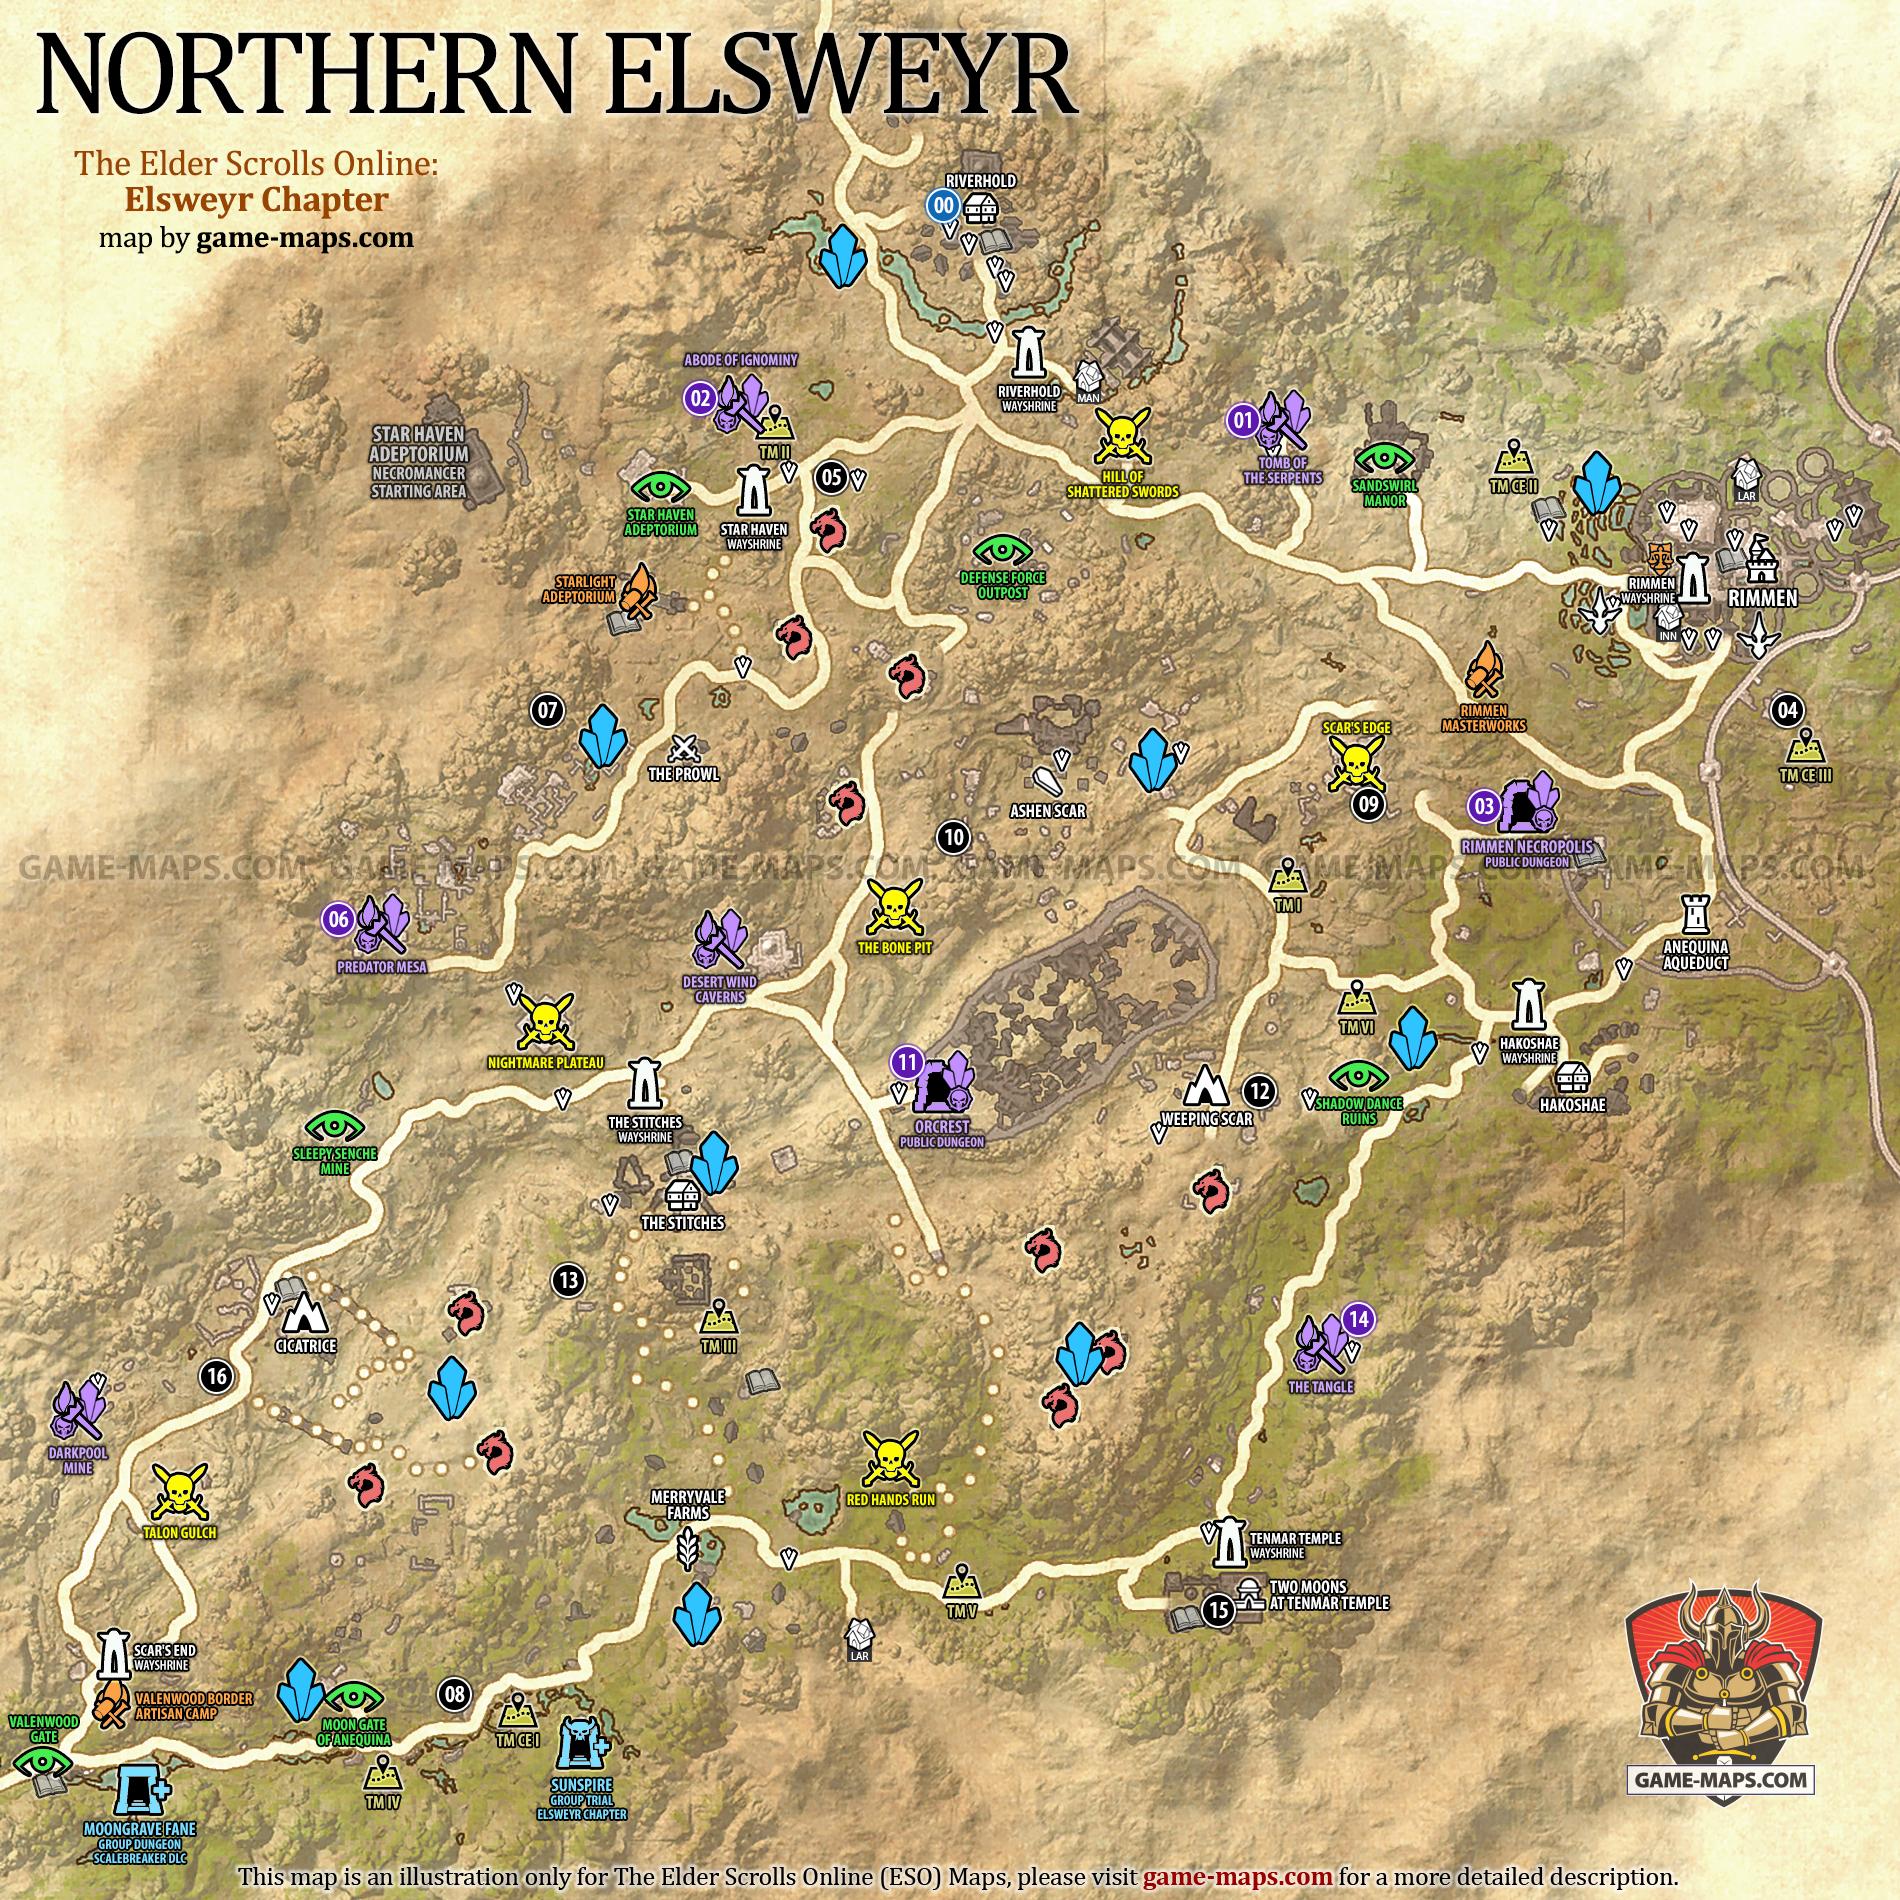 Northern Elsweyr Map for The Elder Scrolls Online: Elsweyr Chapter, The Season of the Dragon 2019 Adventure (ESO).